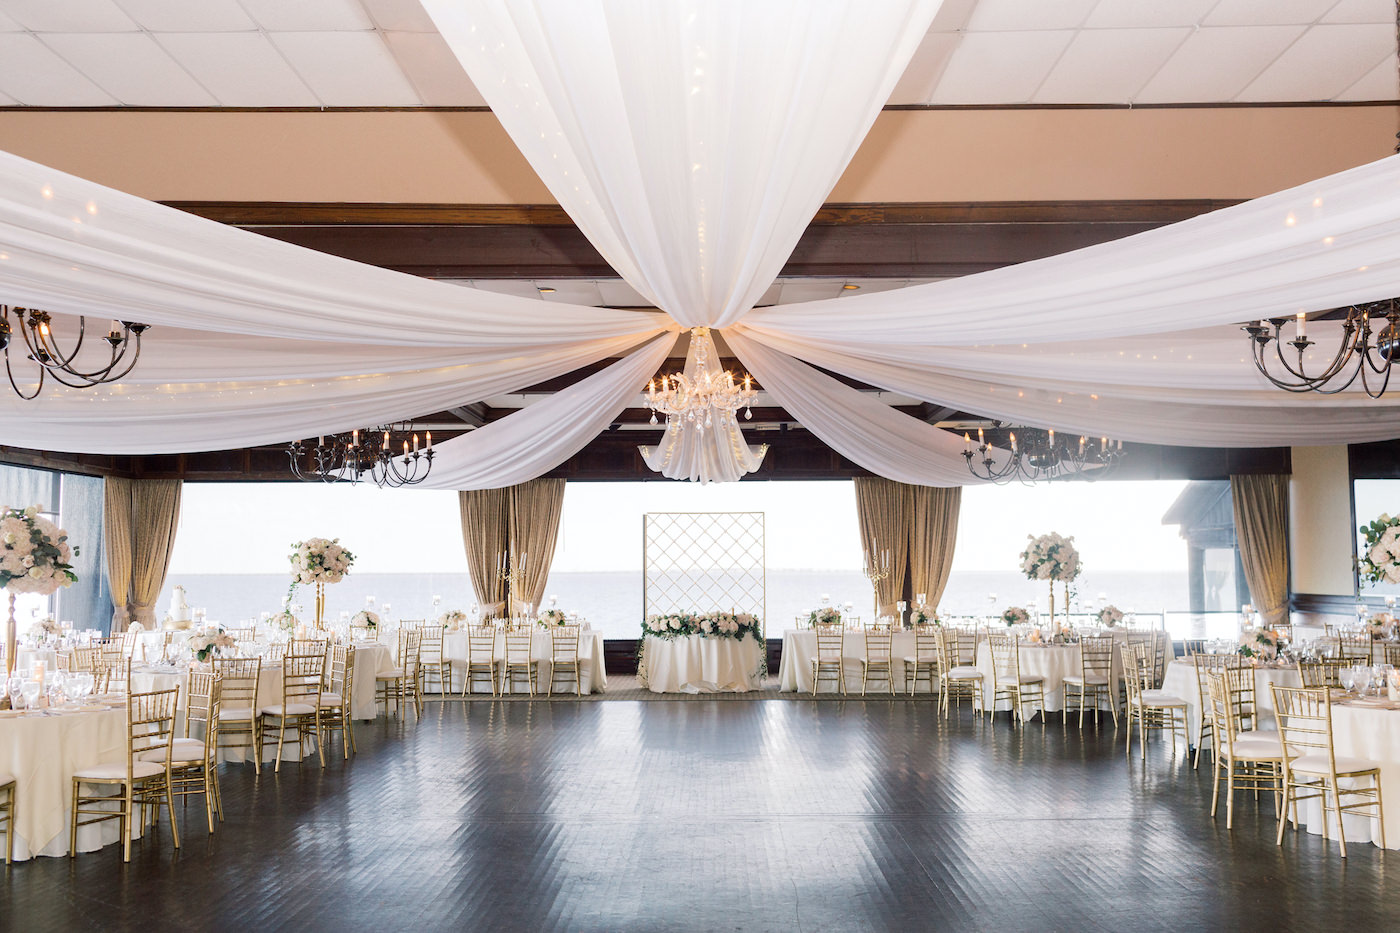 Classic Elegant Wedding Reception Decor, White Ceiling Draping, Chandeliers, Gold Chiavari Chairs, Low and Tall Floral Centerpieces | Tampa Bay Wedding Planner Special Moments Event Planning | Tampa Bay Wedding Reception Venue The Rusty Pelican